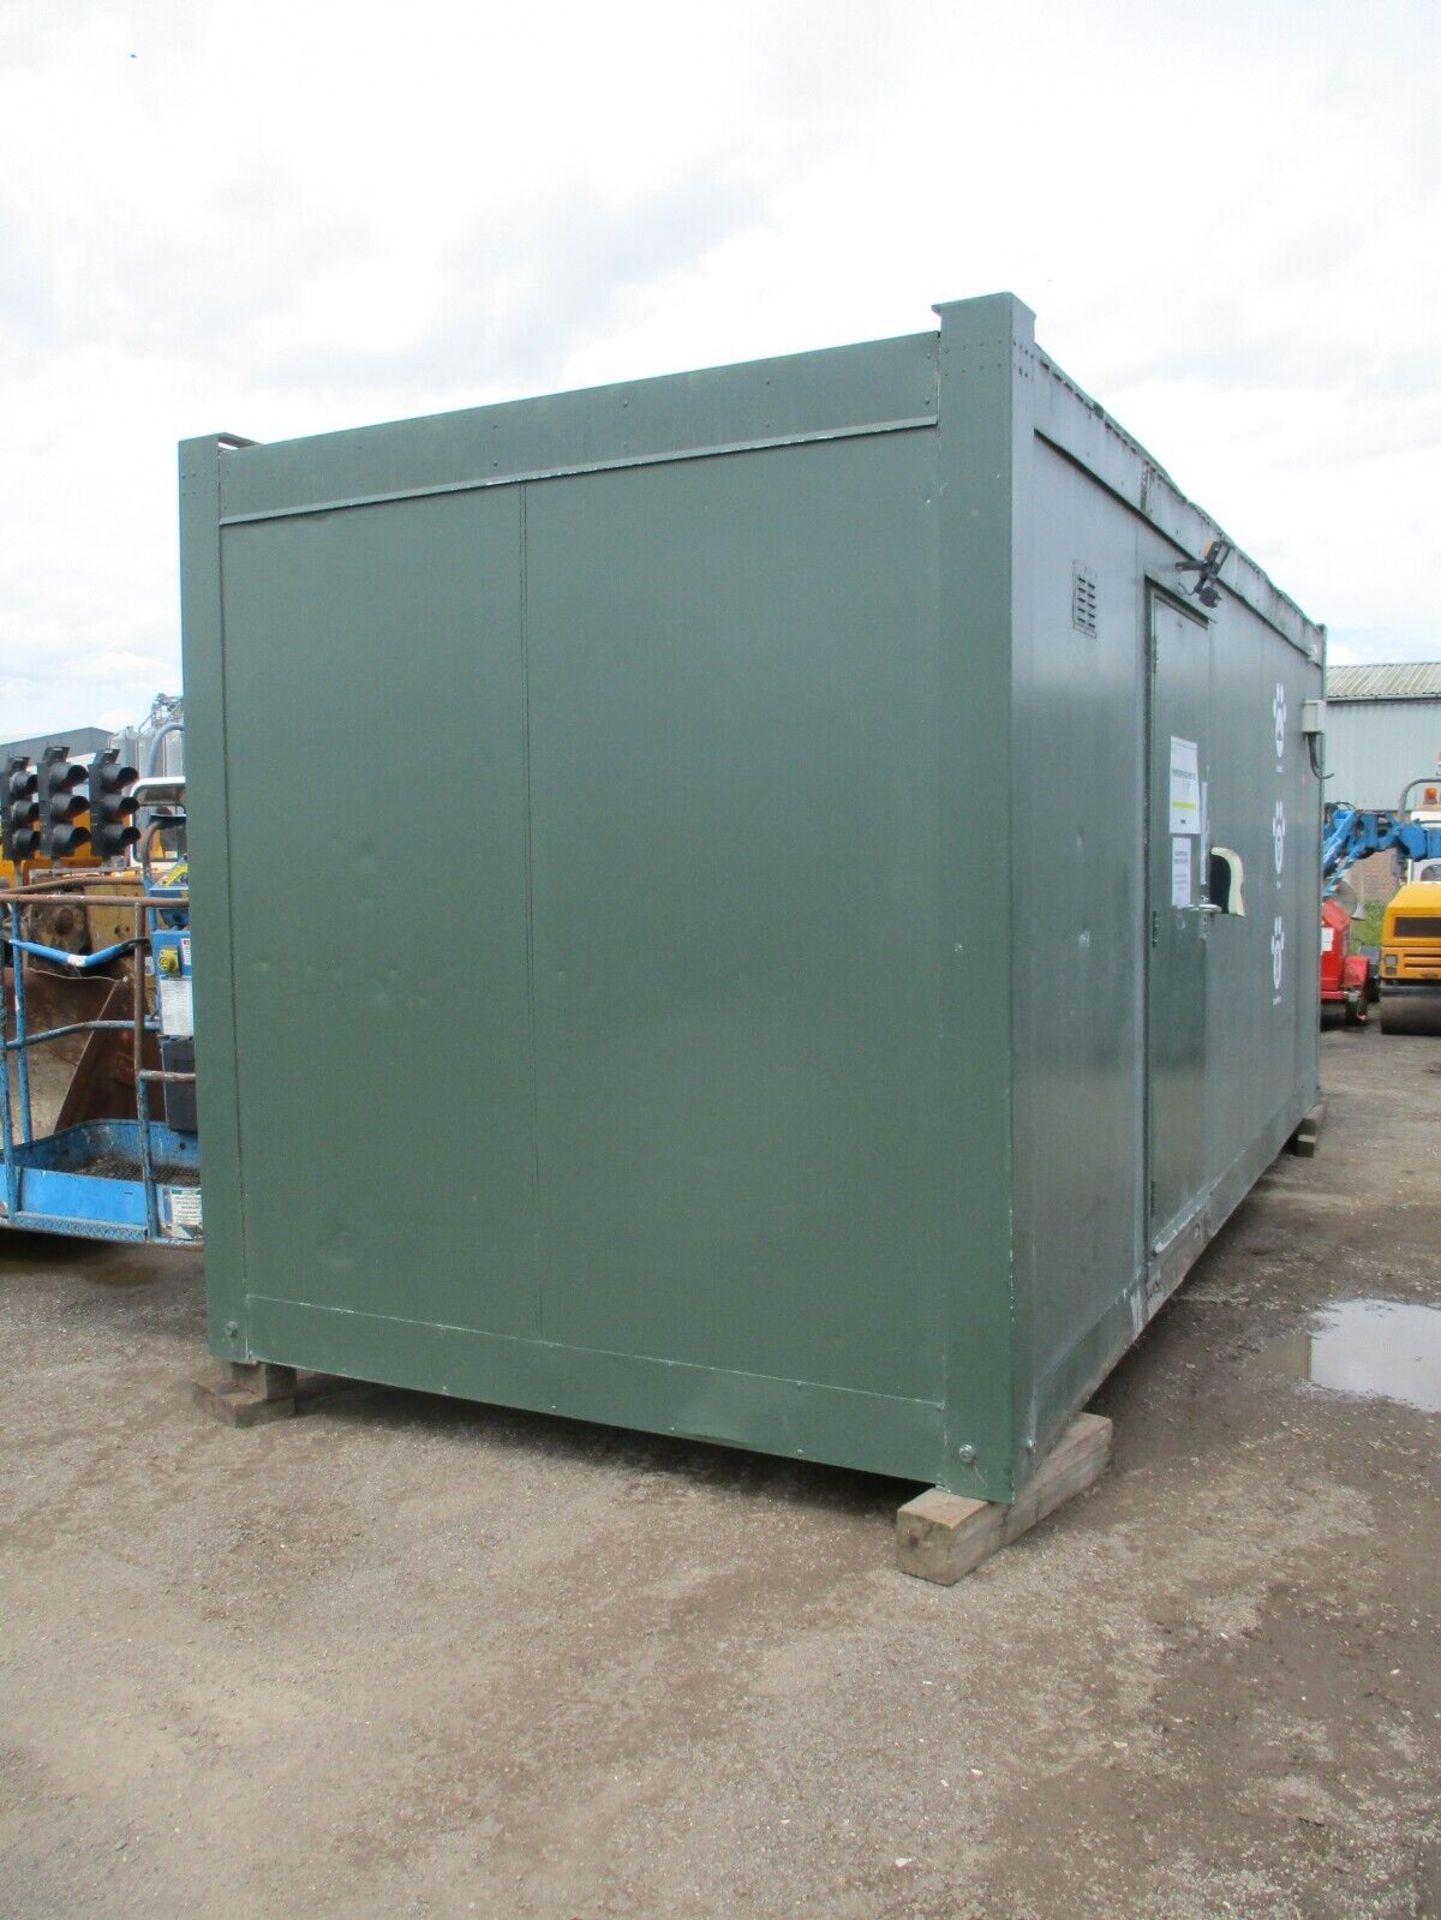 20 X 8 FT FEET FOOT SECURE SHIPPING CONTAINER CANTEEN OFFICE - Image 2 of 8